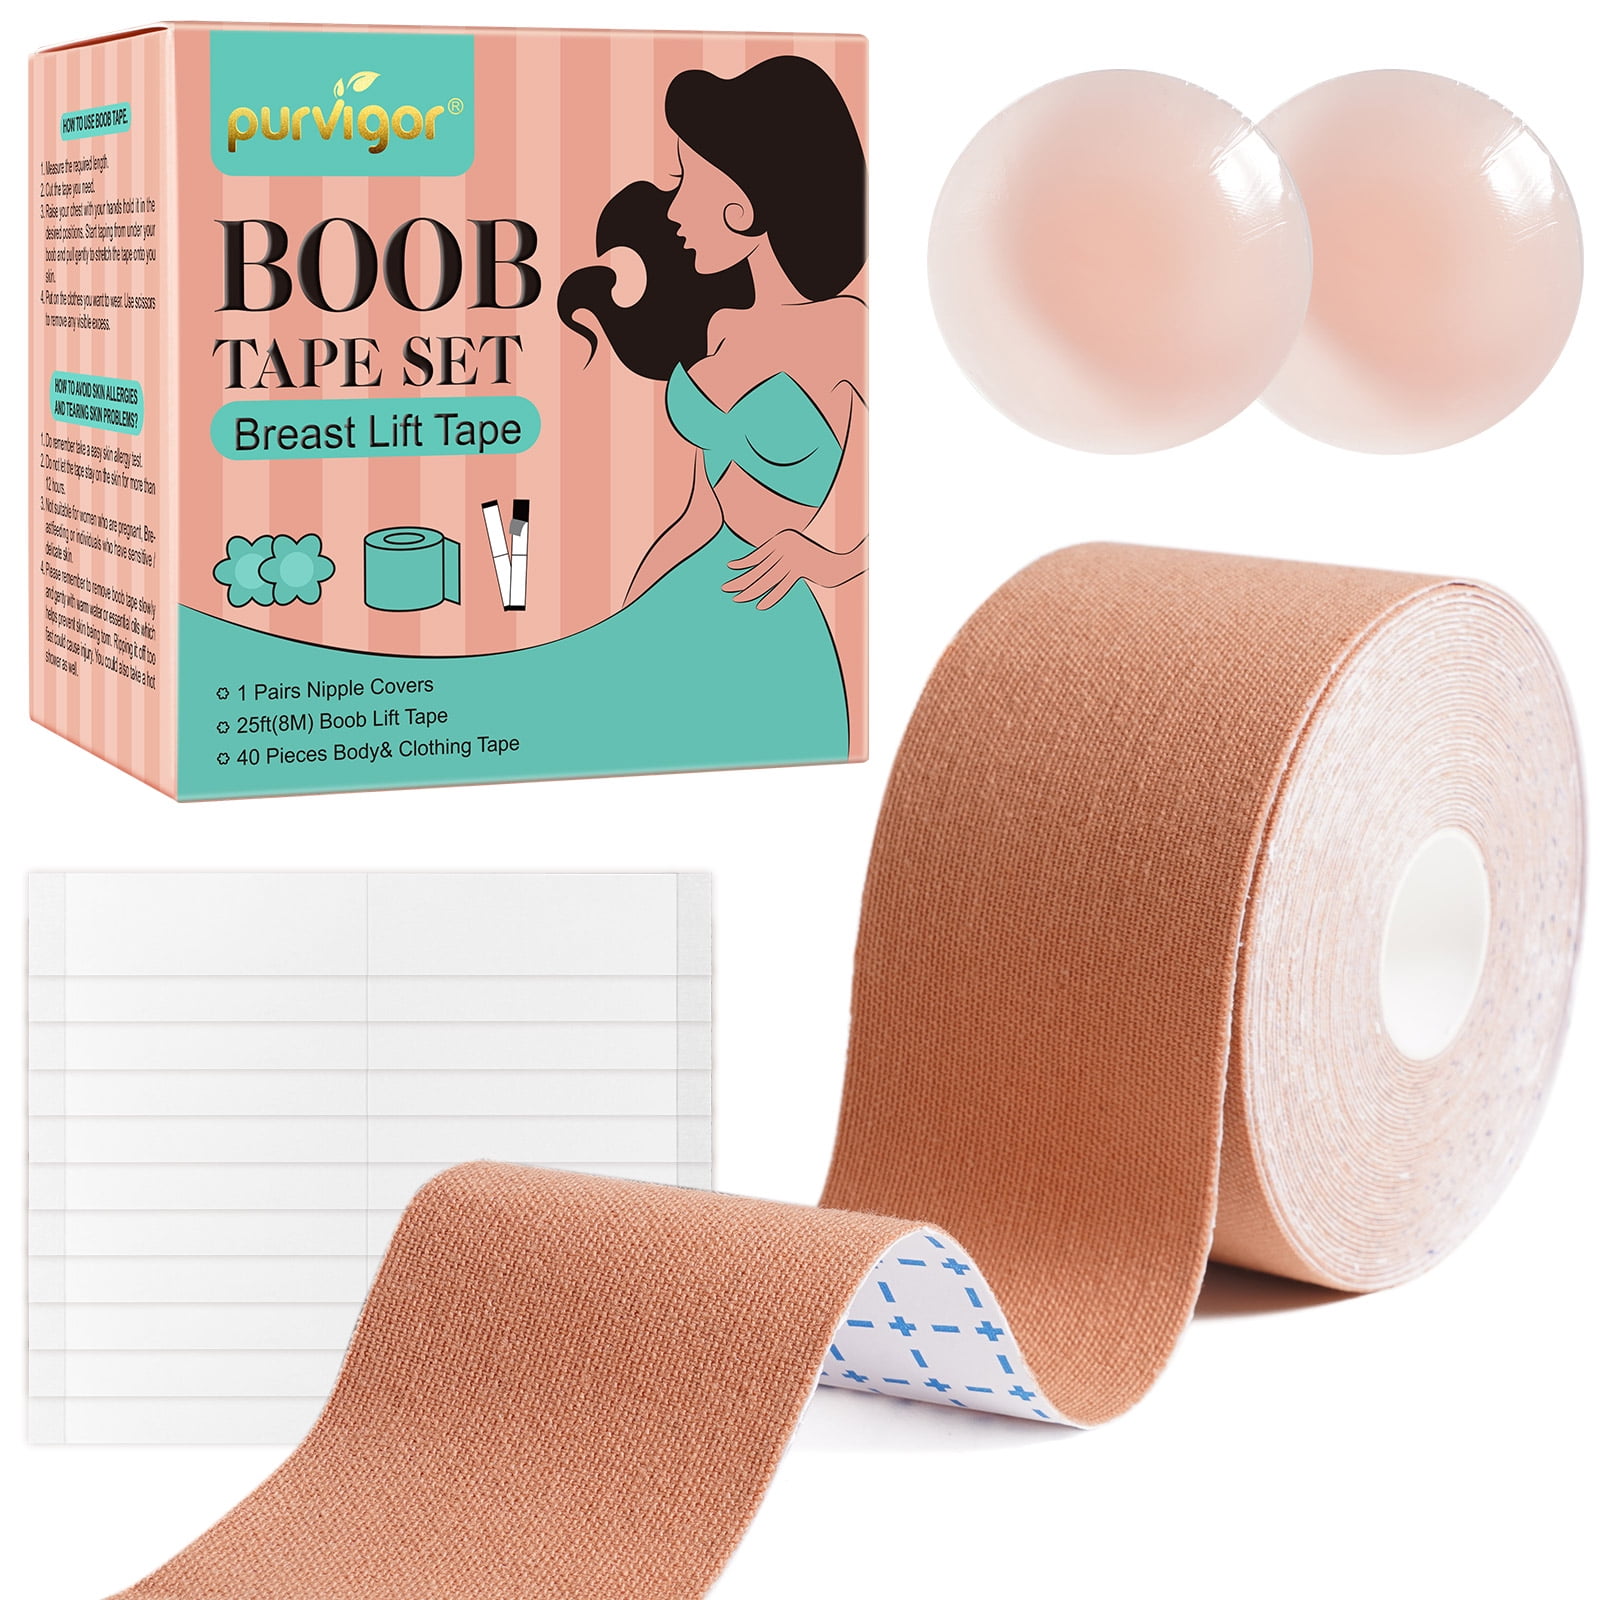 Been LUH-VING this boob tape! The most comfortable material I've ever